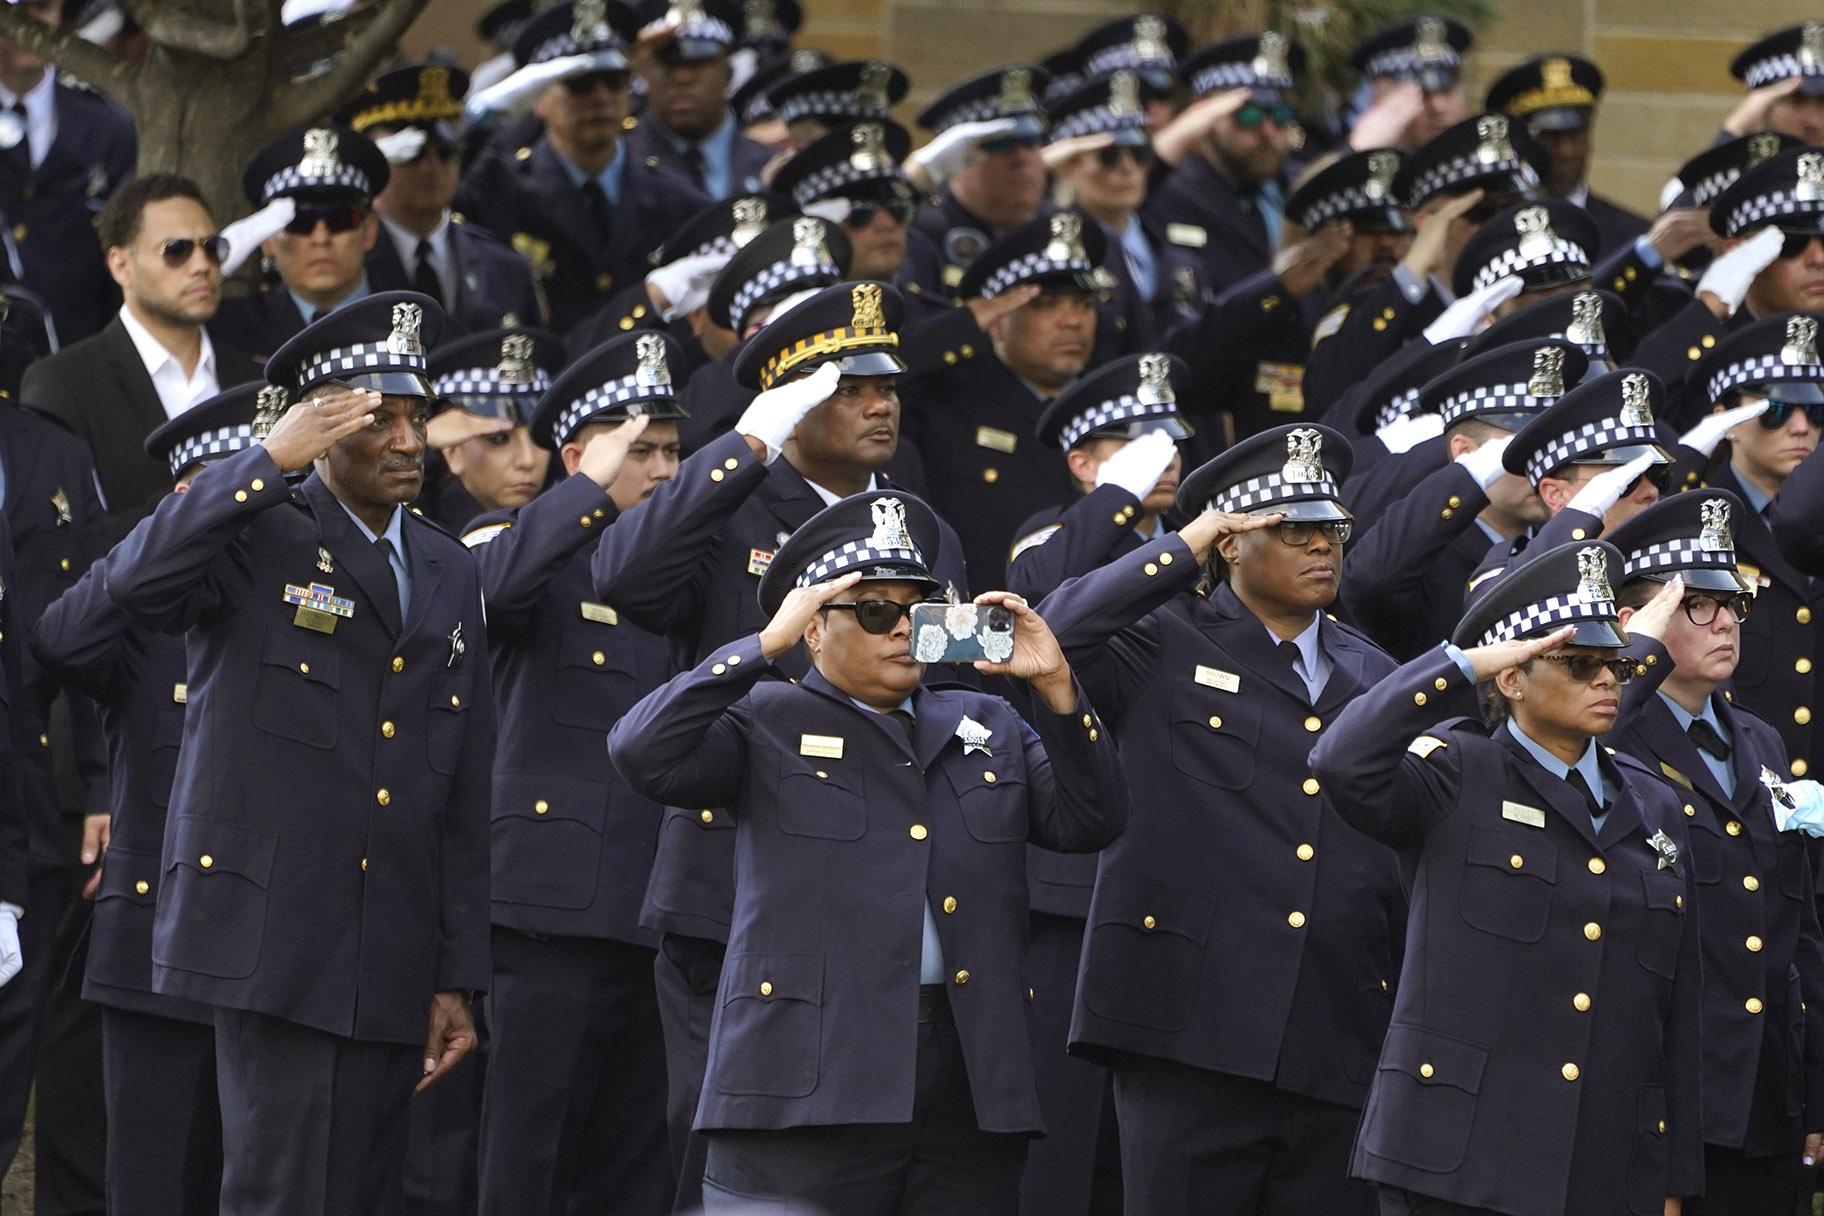 Chicago police officers salute as the body of slain Chicago police Officer Ella French is carried into the St. Rita of Cascia Shrine Chapel for a funeral service Thursday, Aug. 19, 2021, in Chicago. (AP Photo / Charles Rex Arbogast)